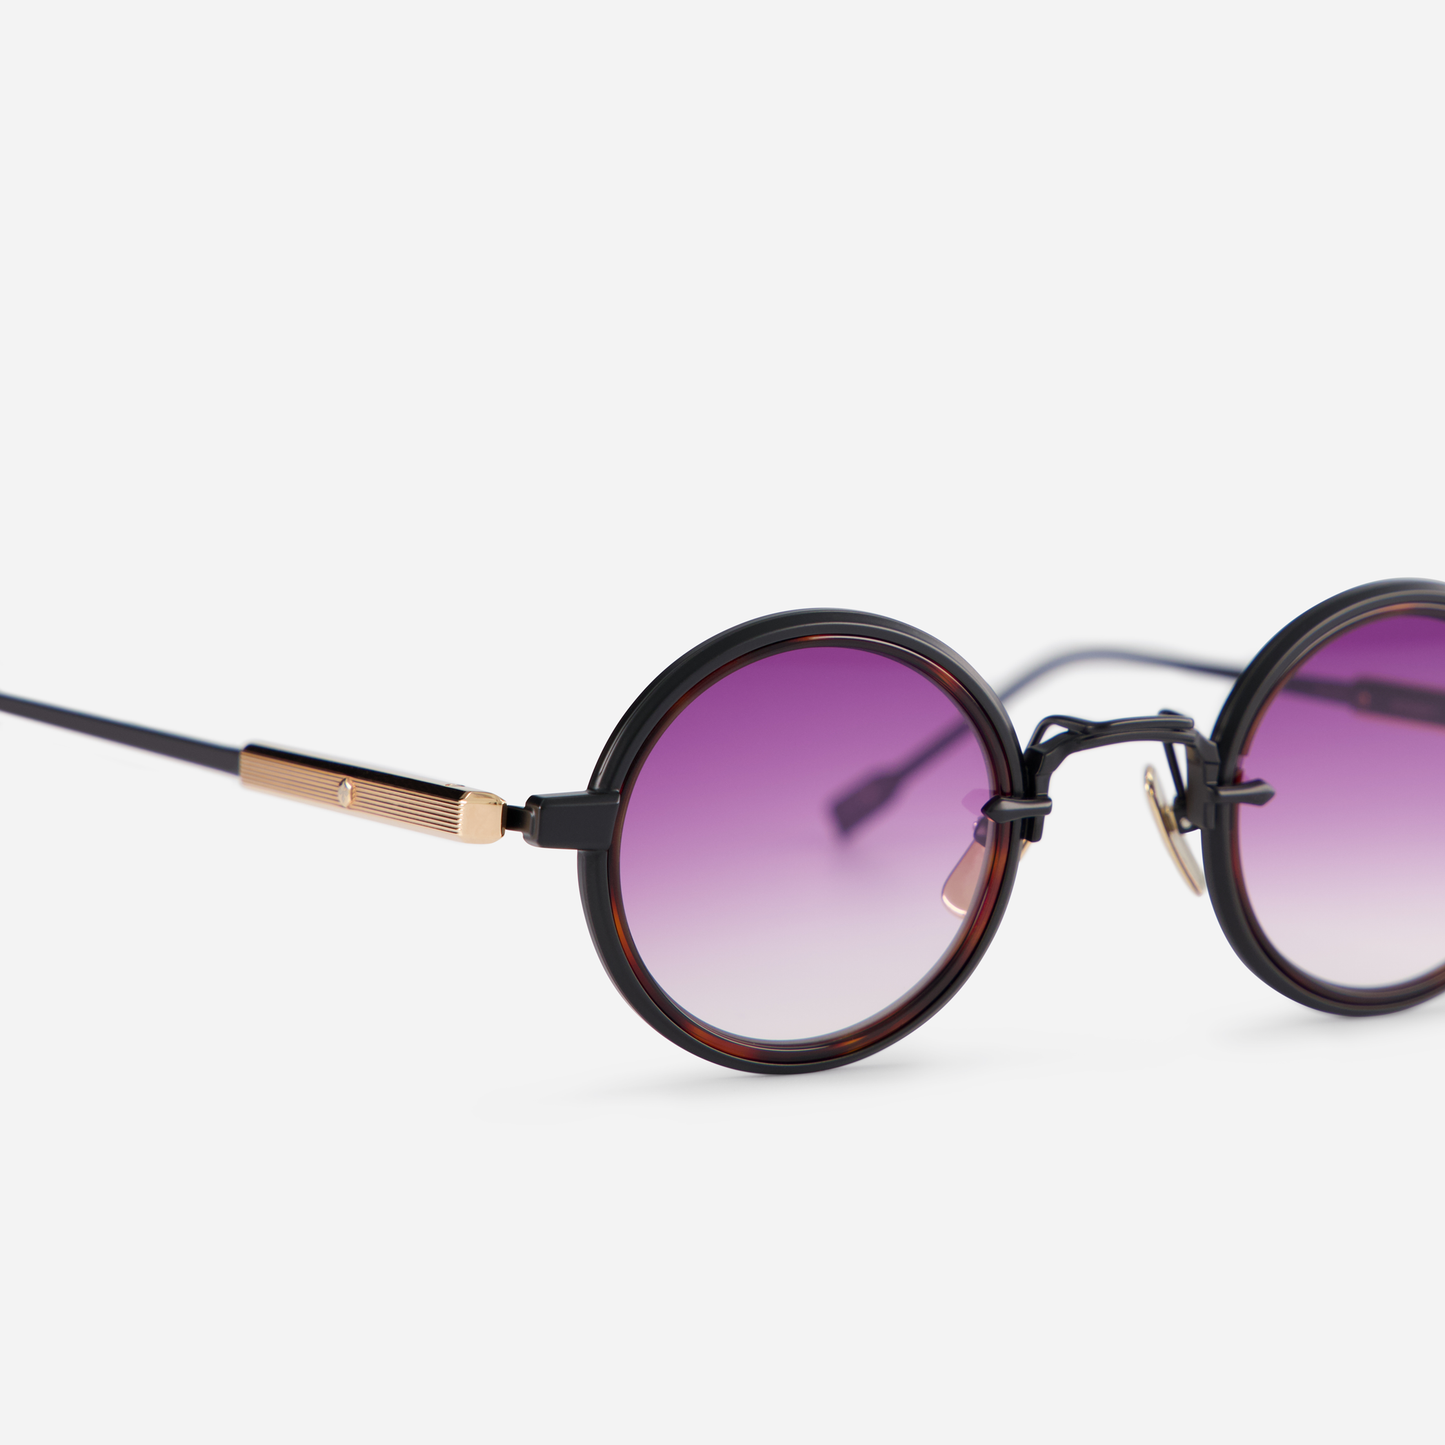 This eyewear, Rotanev-T B/RG, includes a titanium frame with black mat and rose gold coating, a tortoise takiron rim insert, and gradient purple lenses.